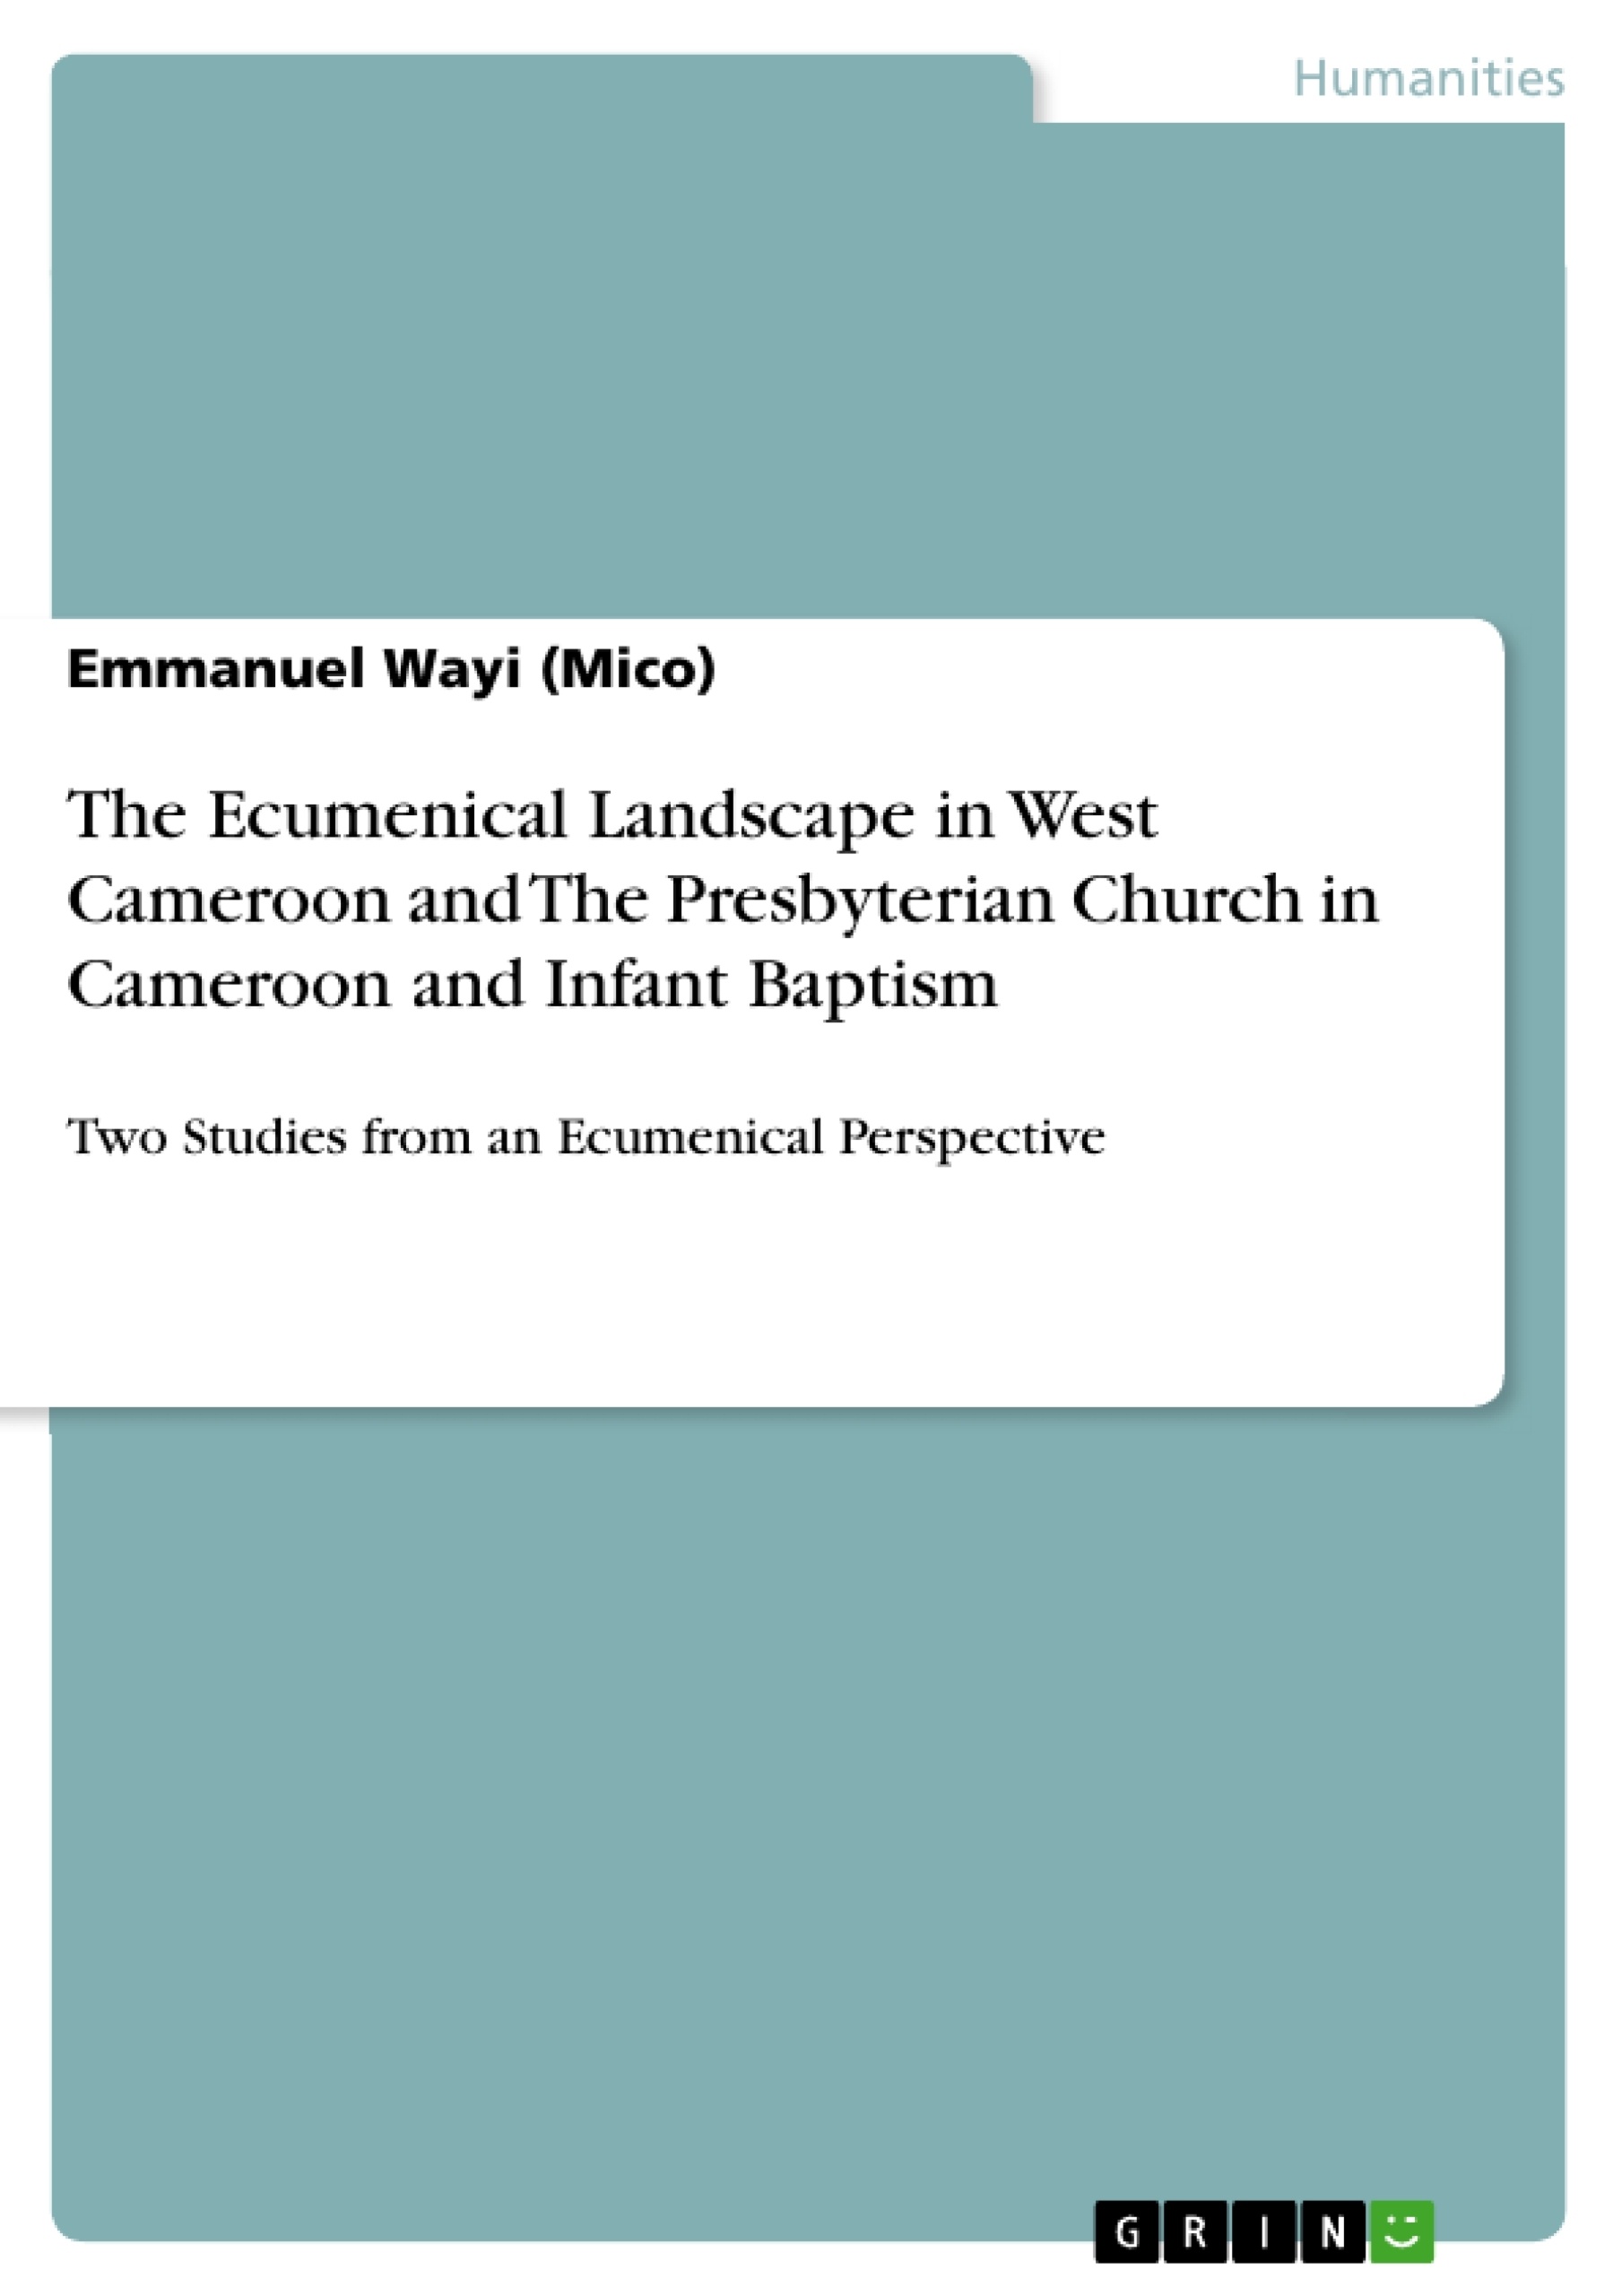 Title: The Ecumenical Landscape in West Cameroon and The Presbyterian Church in Cameroon and Infant Baptism